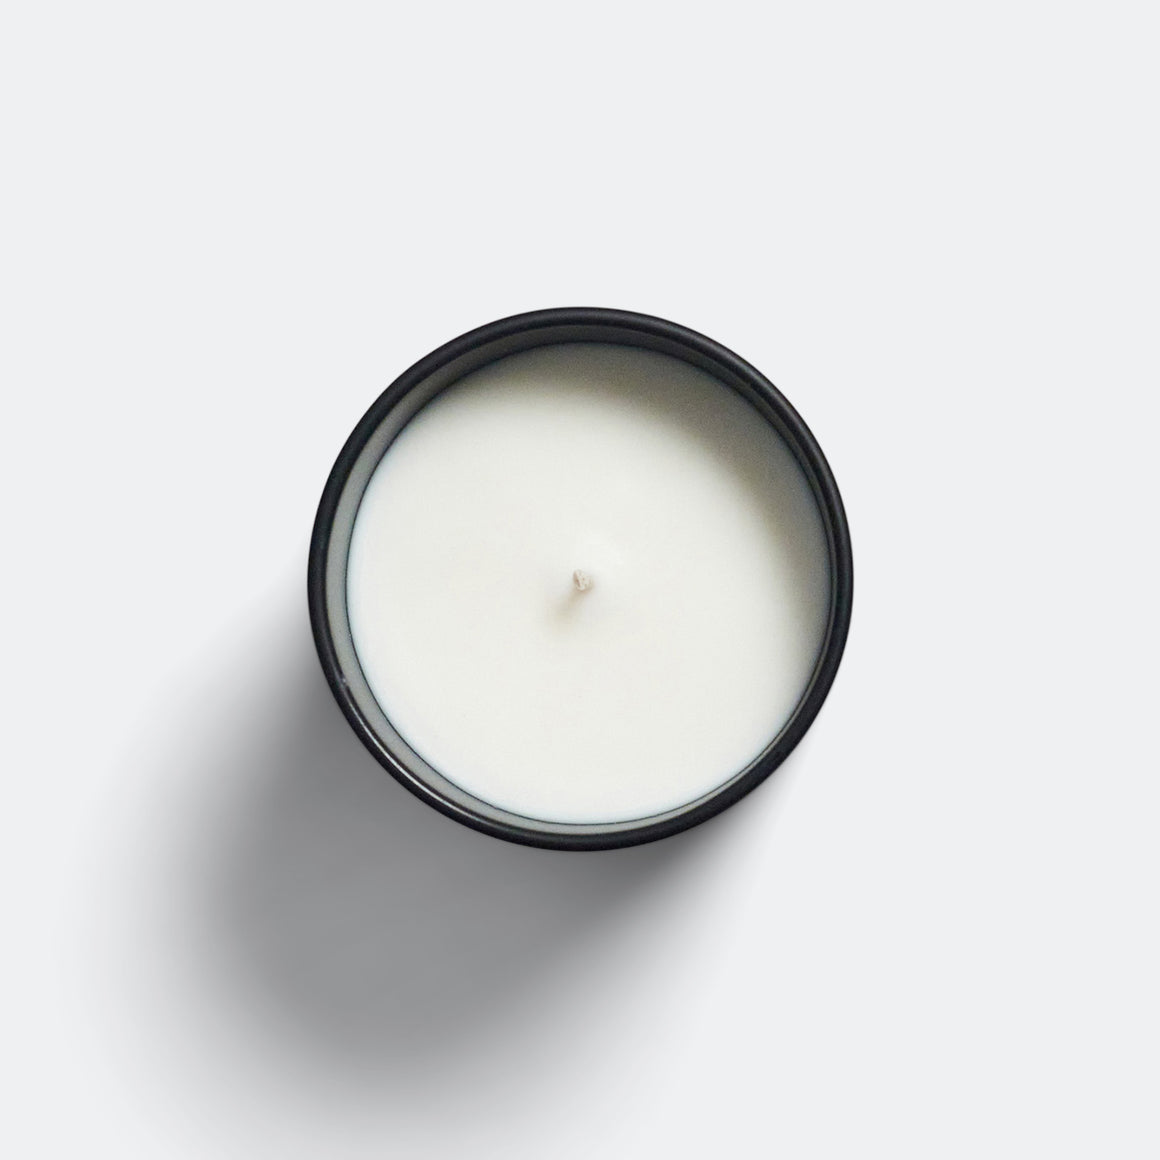 Mihan Aromatics - Petrichor Plains Candle - 300g - UP THERE